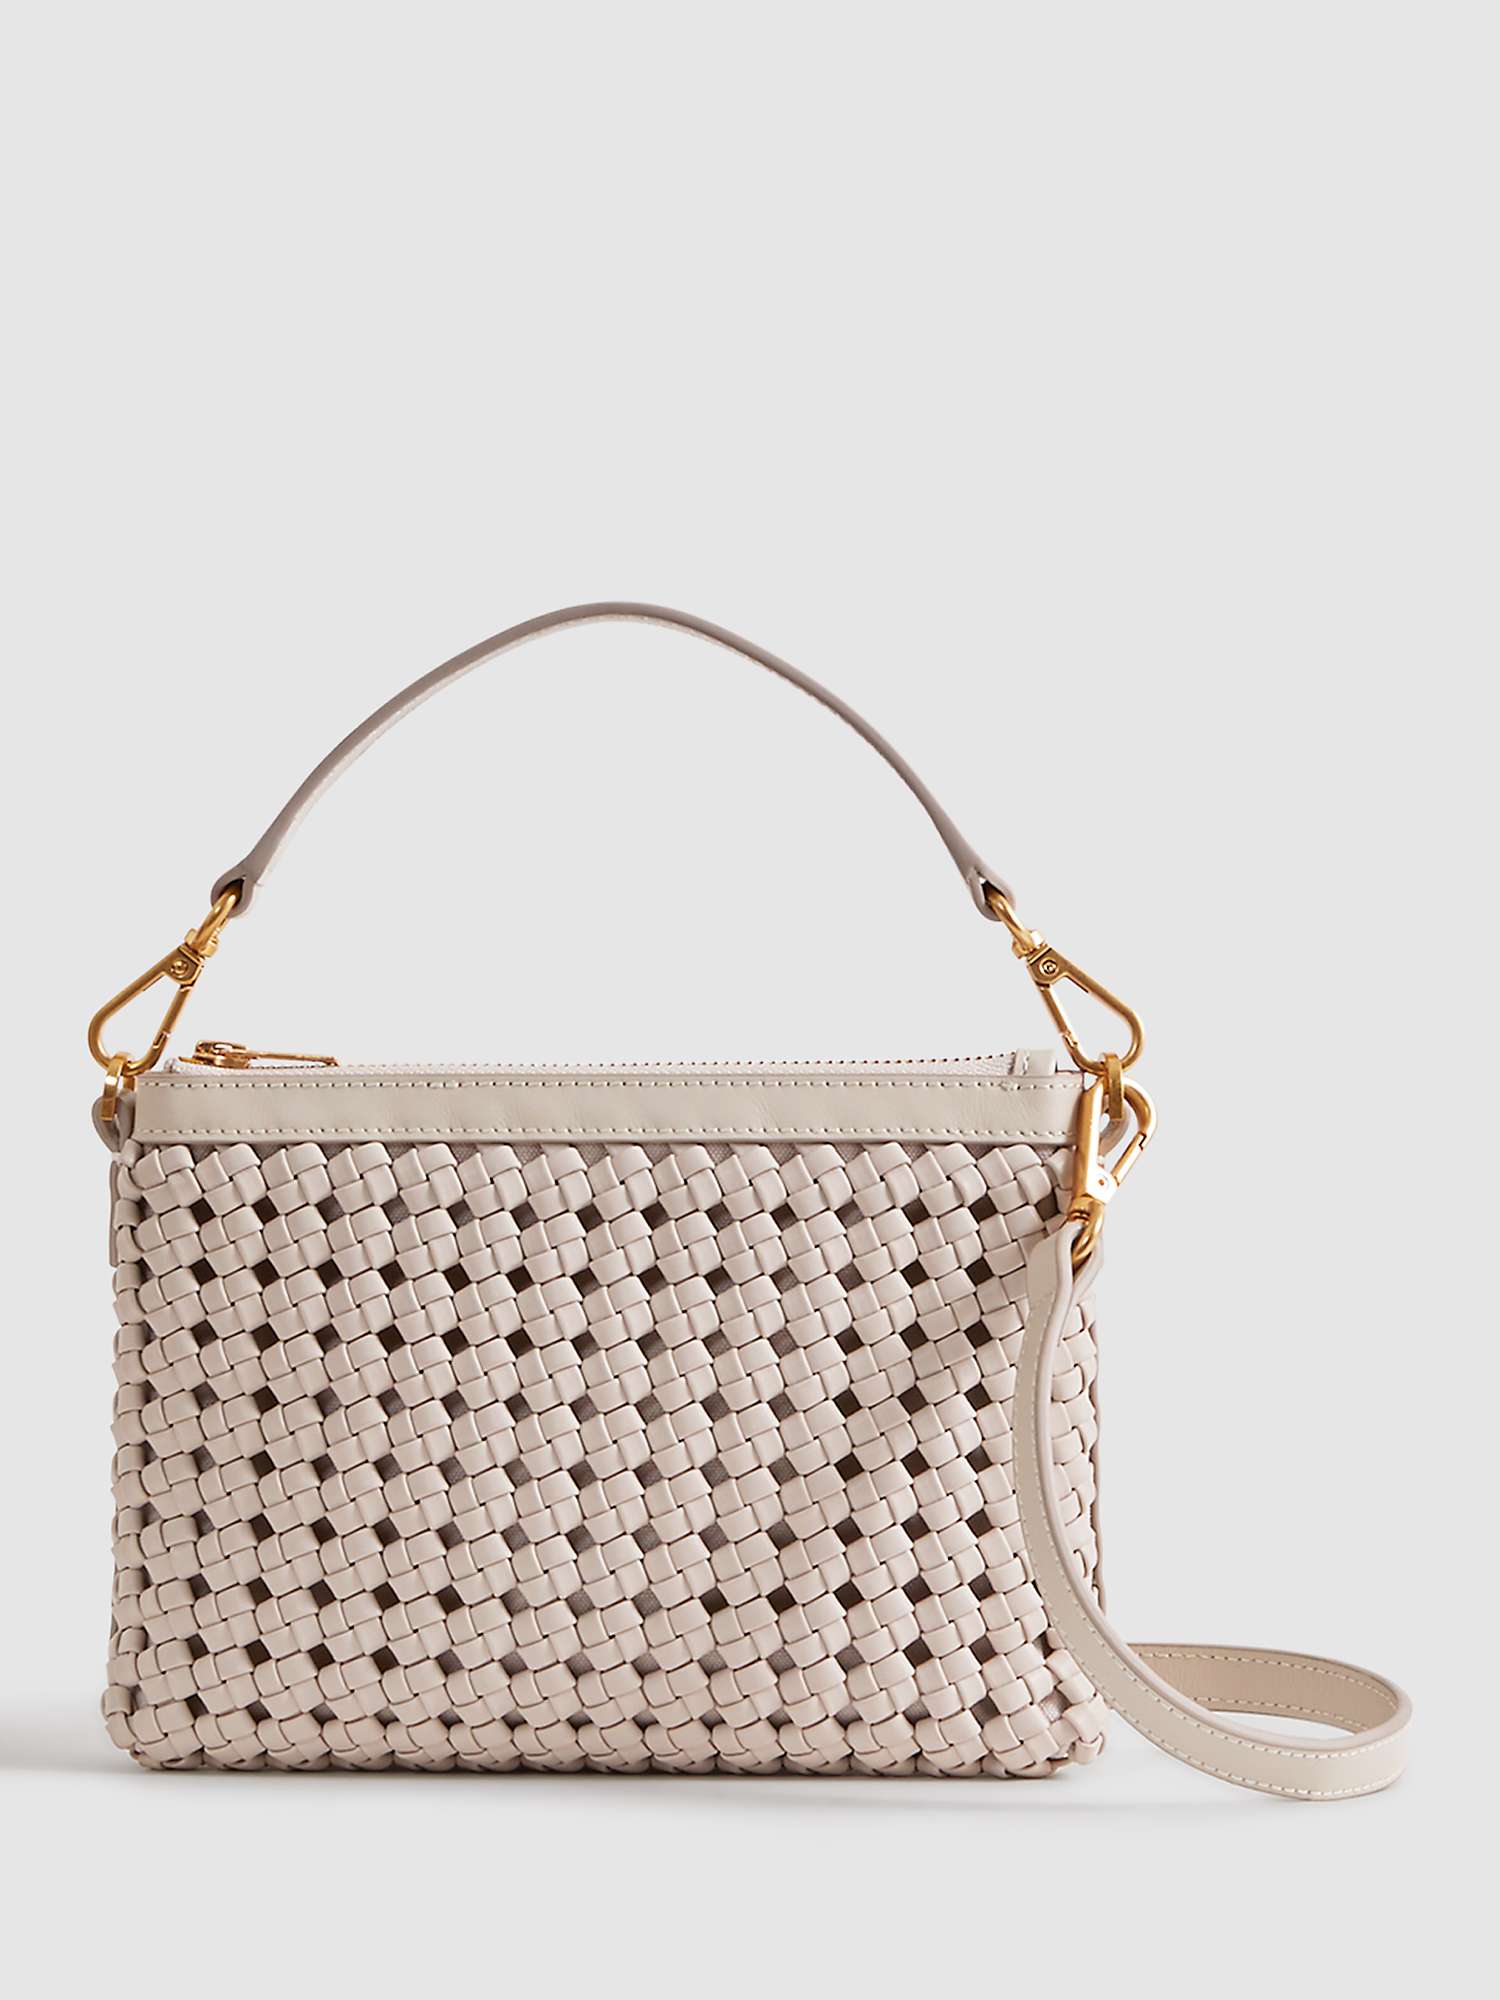 Buy Reiss Brompton Woven Leather Shoulder Bag, Stone Online at johnlewis.com